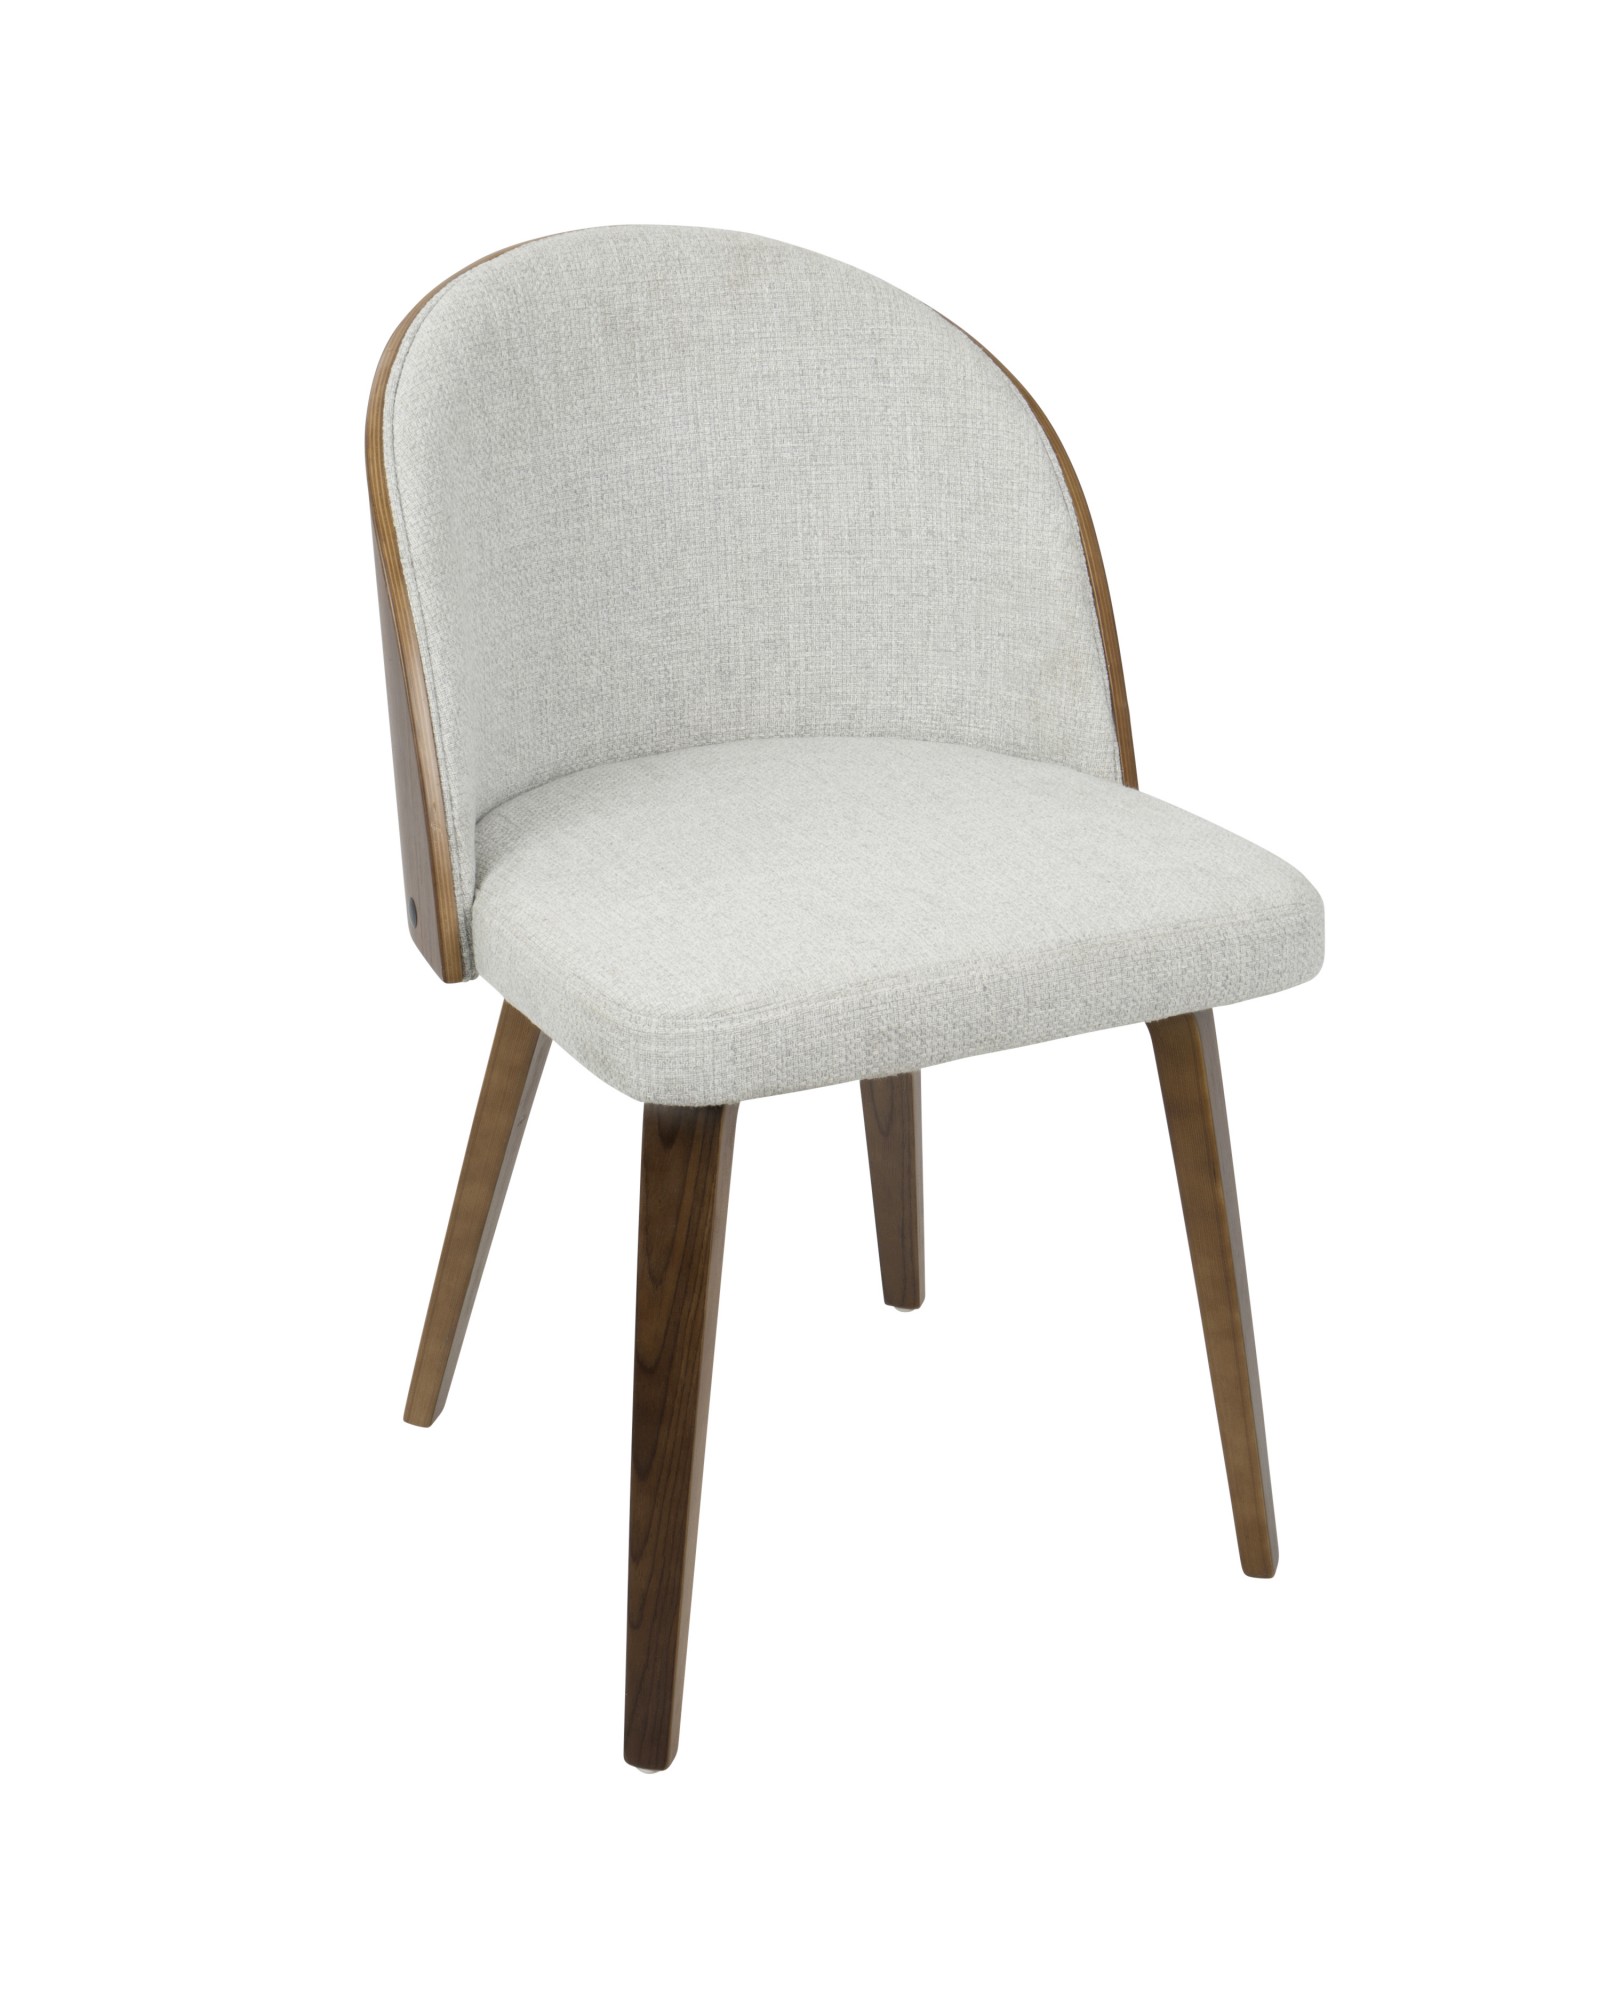 Luna Contemporary Dining/Accent Chair in Walnut with White Noise Fabric - Set of 2